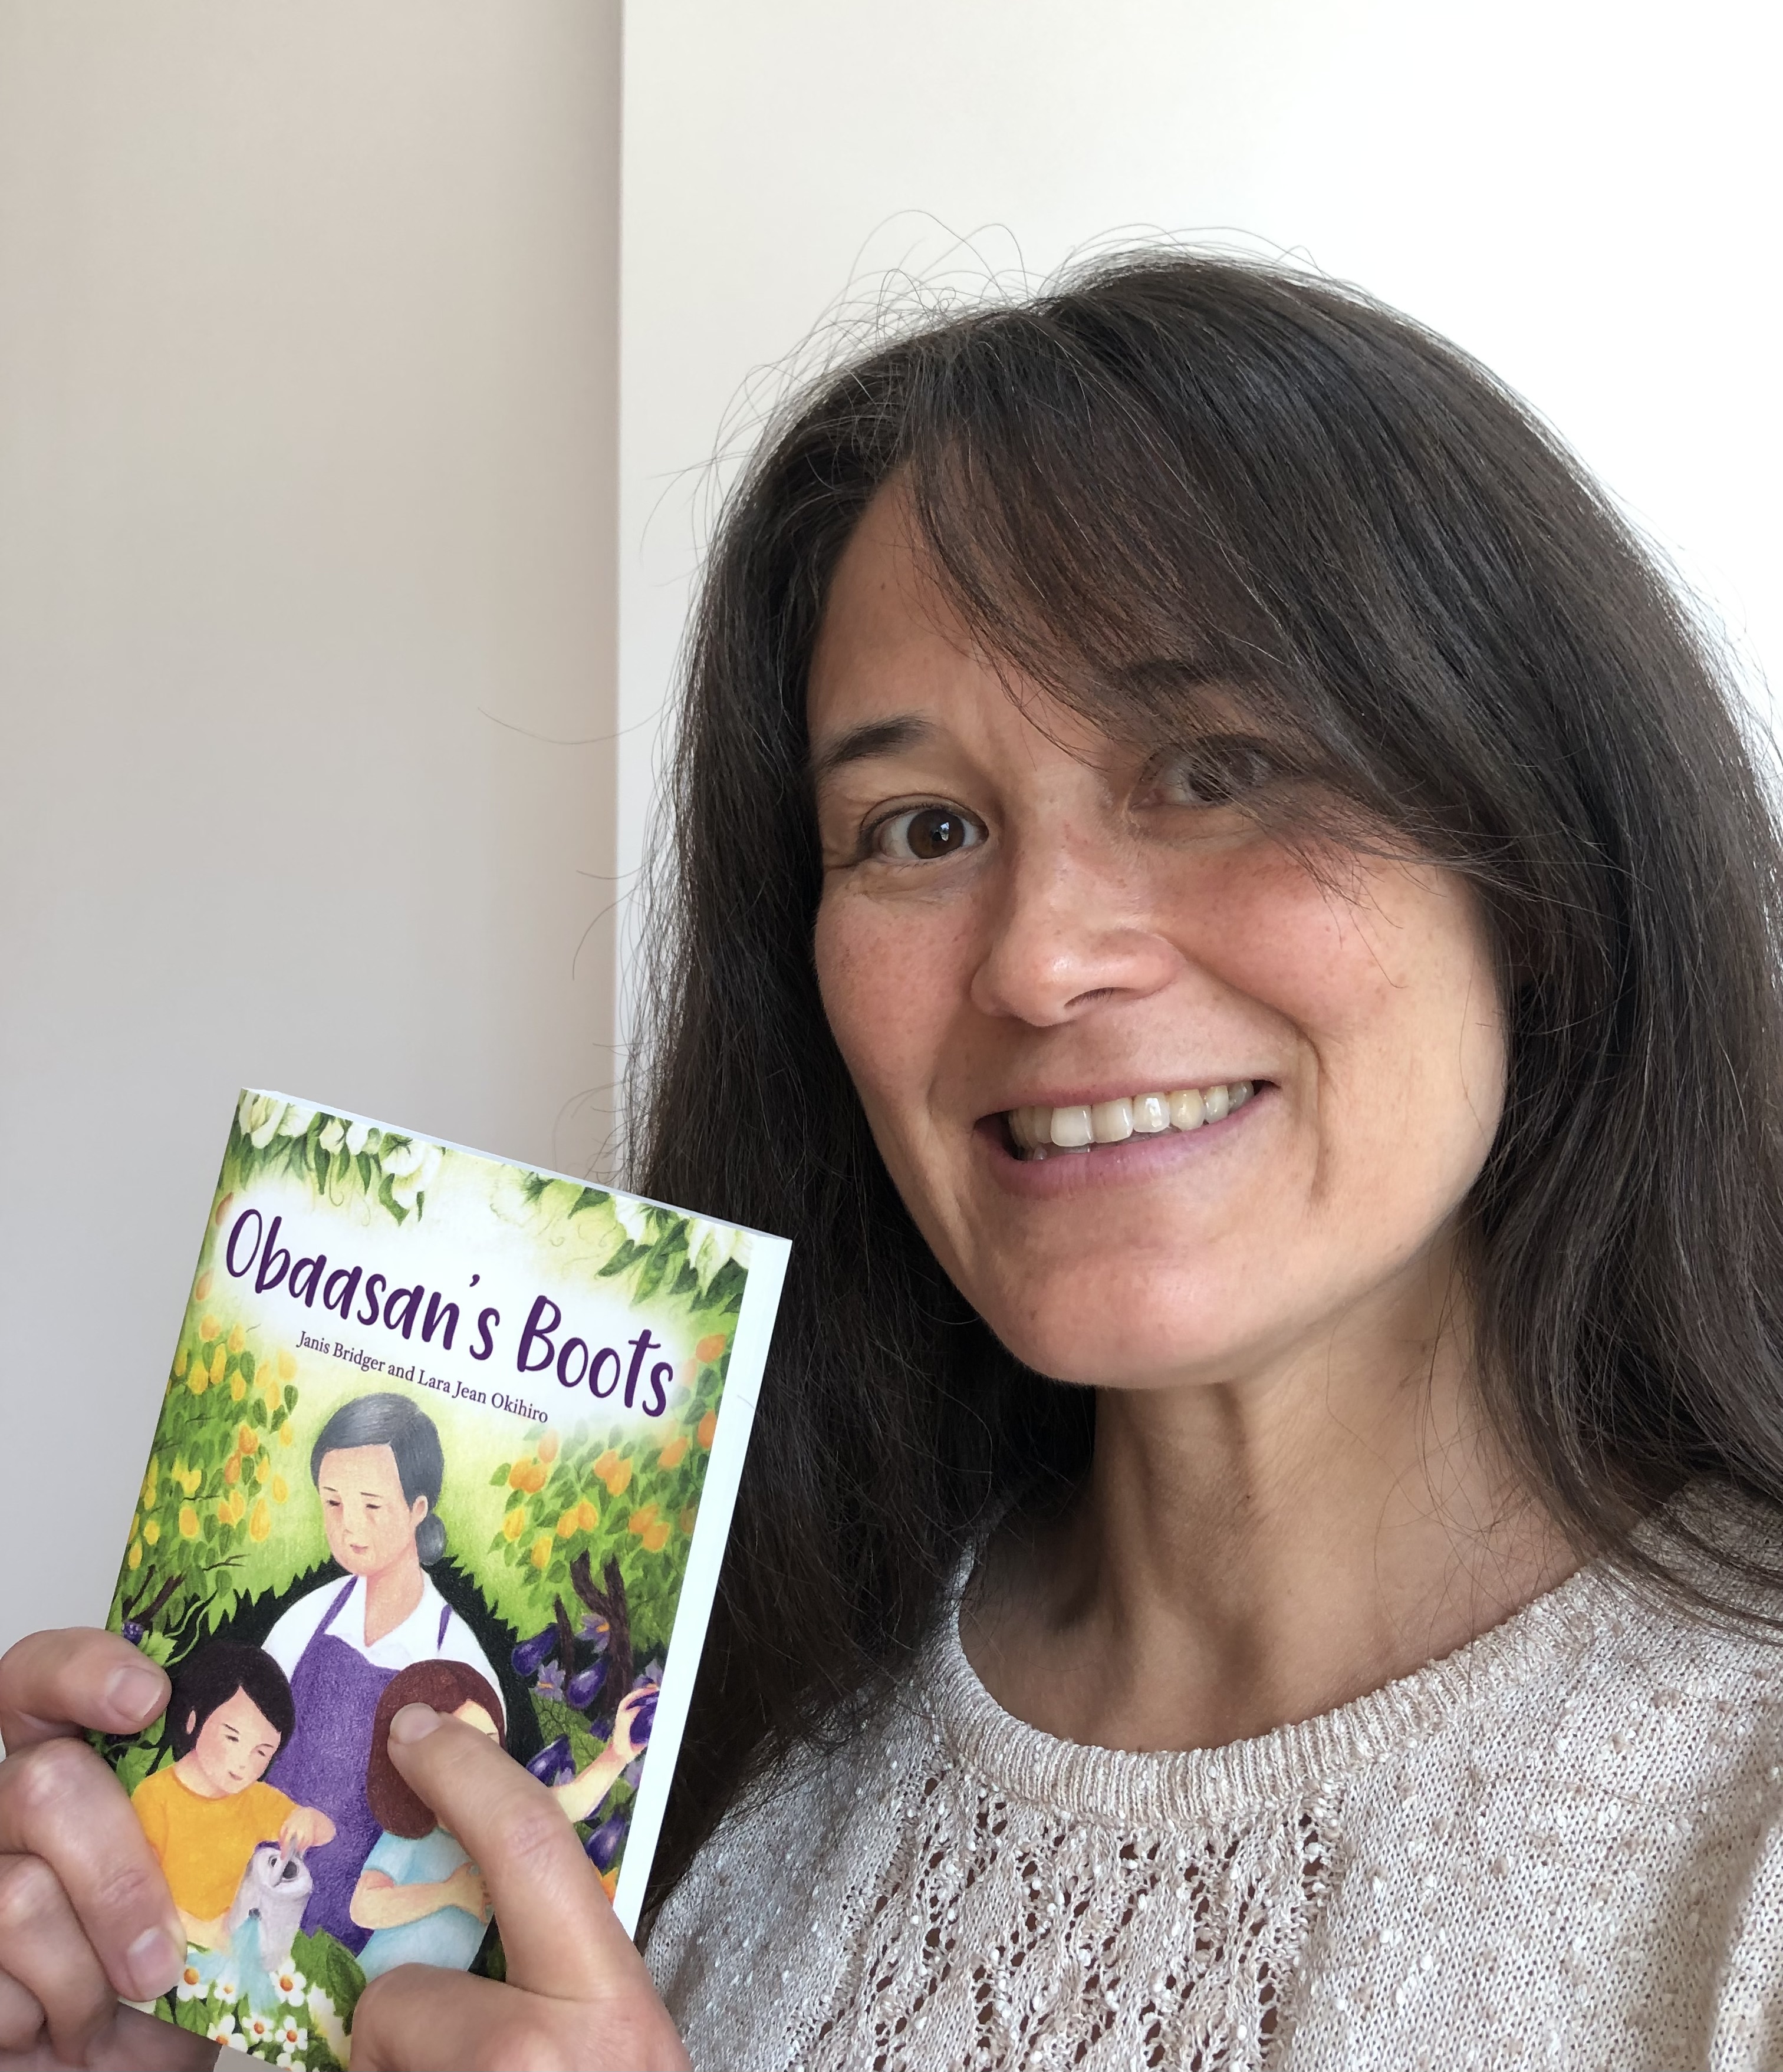 A woman with brown hair smiles holding a book that reads Obaasan's Boots.